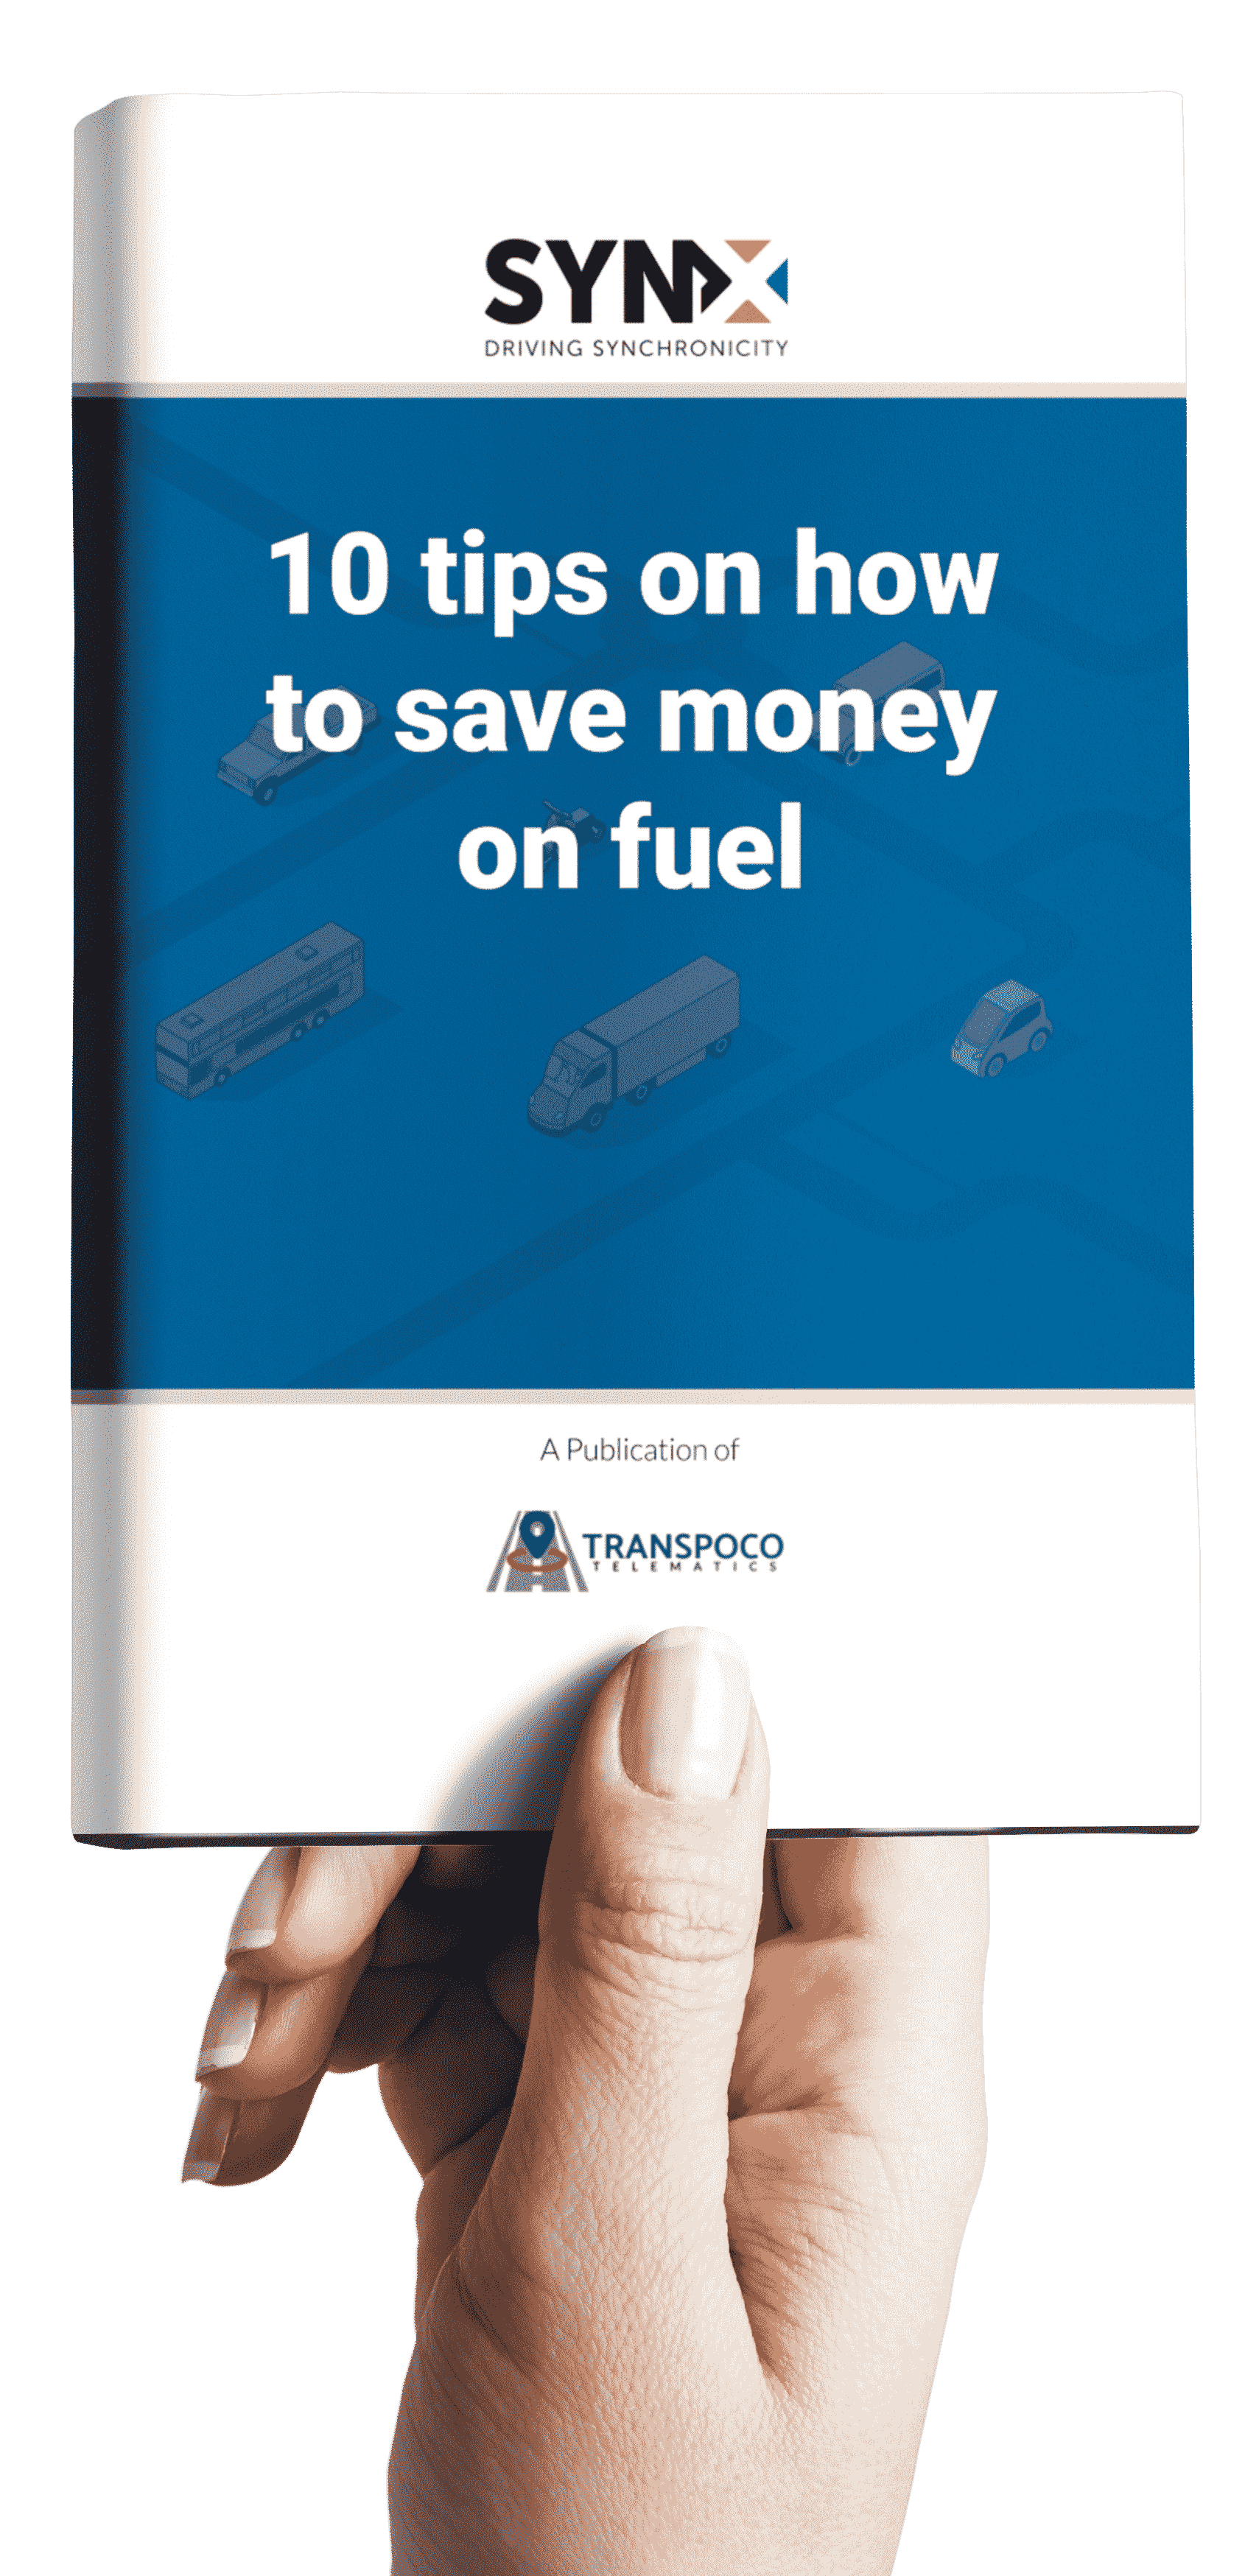 eBook_10 tips on how to save money on fuel_EN - MOCKUP